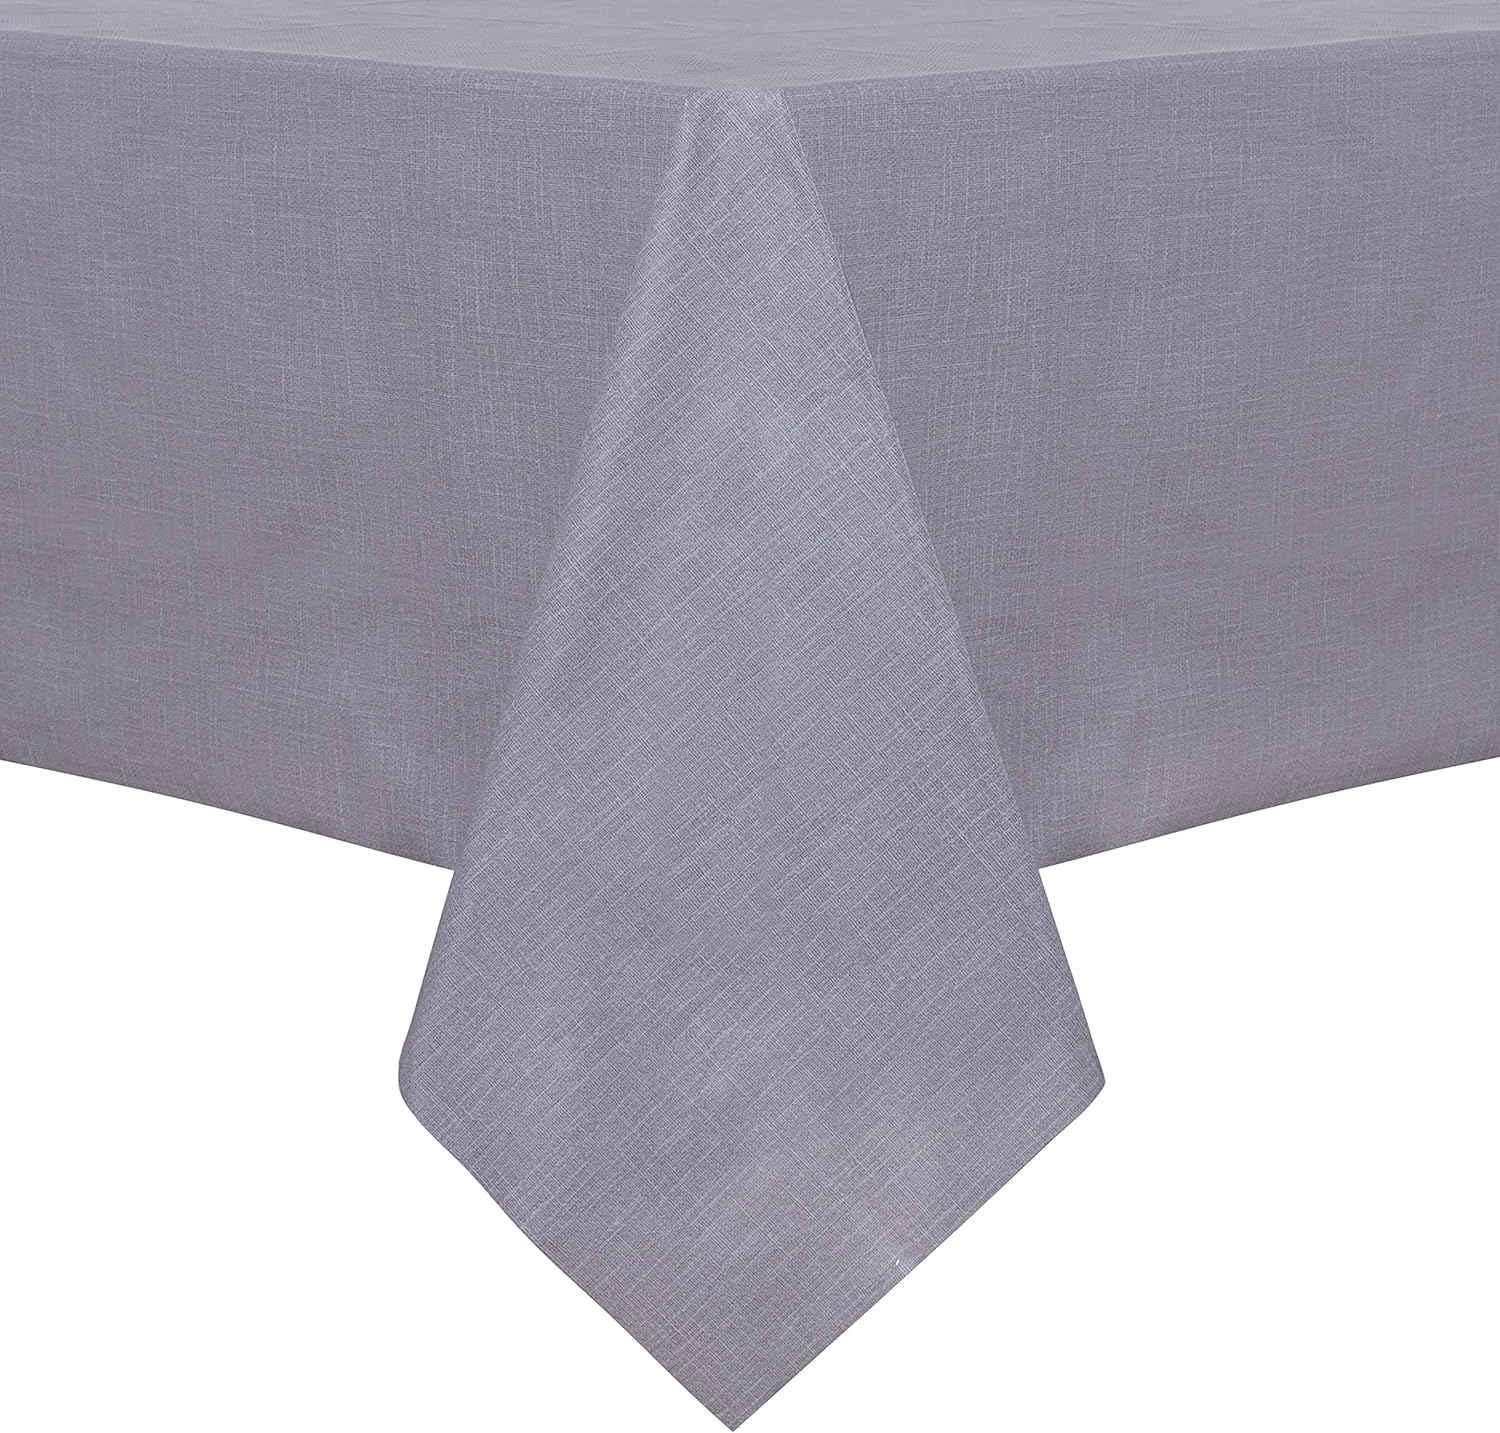 sancua 100% Waterproof Rectangle PVC Tablecloth - 54 x 108 Inch - Oil Proof Spill Proof Vinyl Table Cloth, Wipe Clean Table Cover for Dining Table, Buffet Parties and Camping, Grey